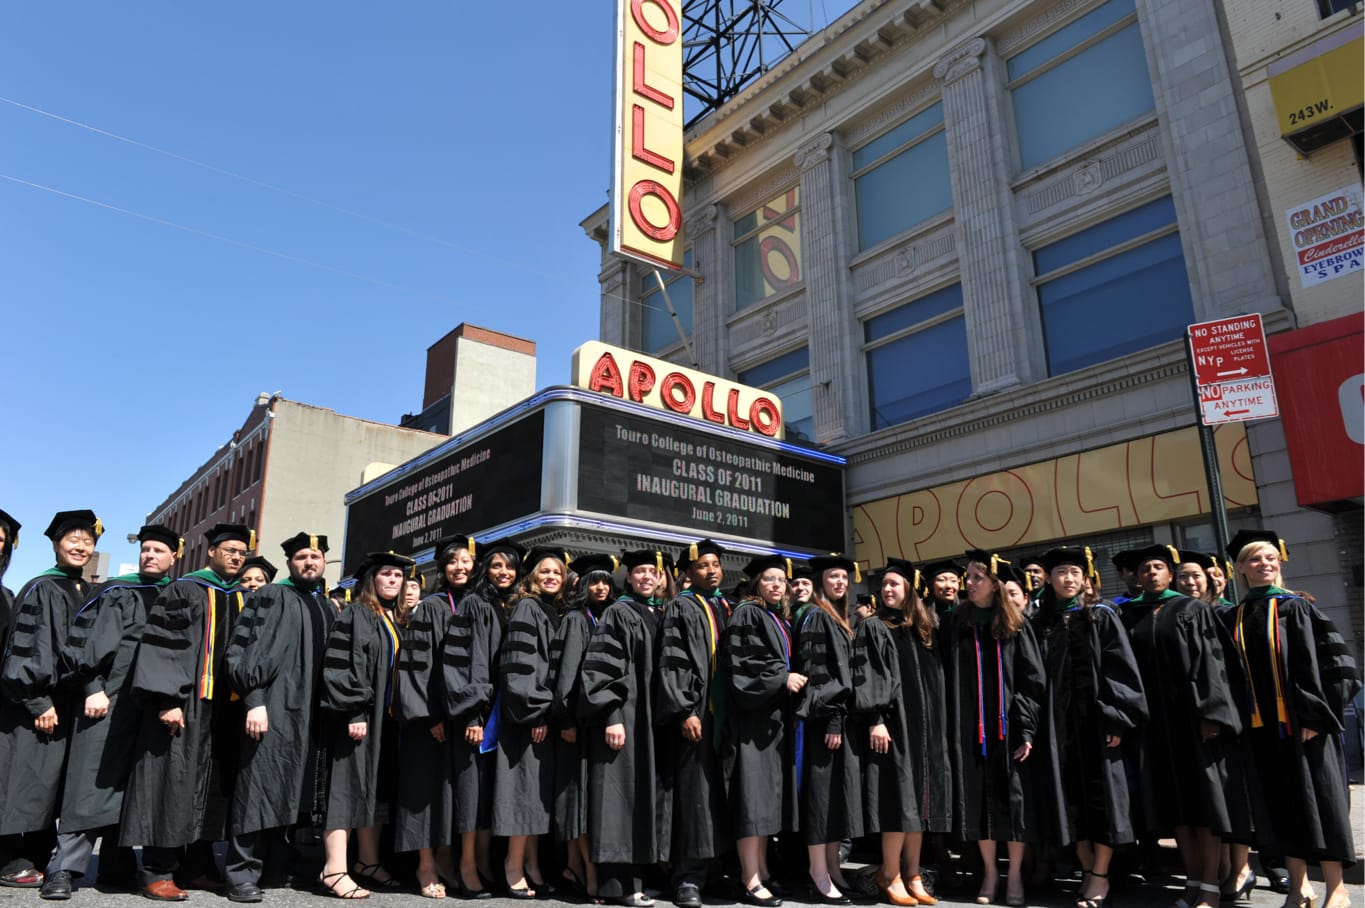 Class of 2011 graduates standing outside of the Apollo